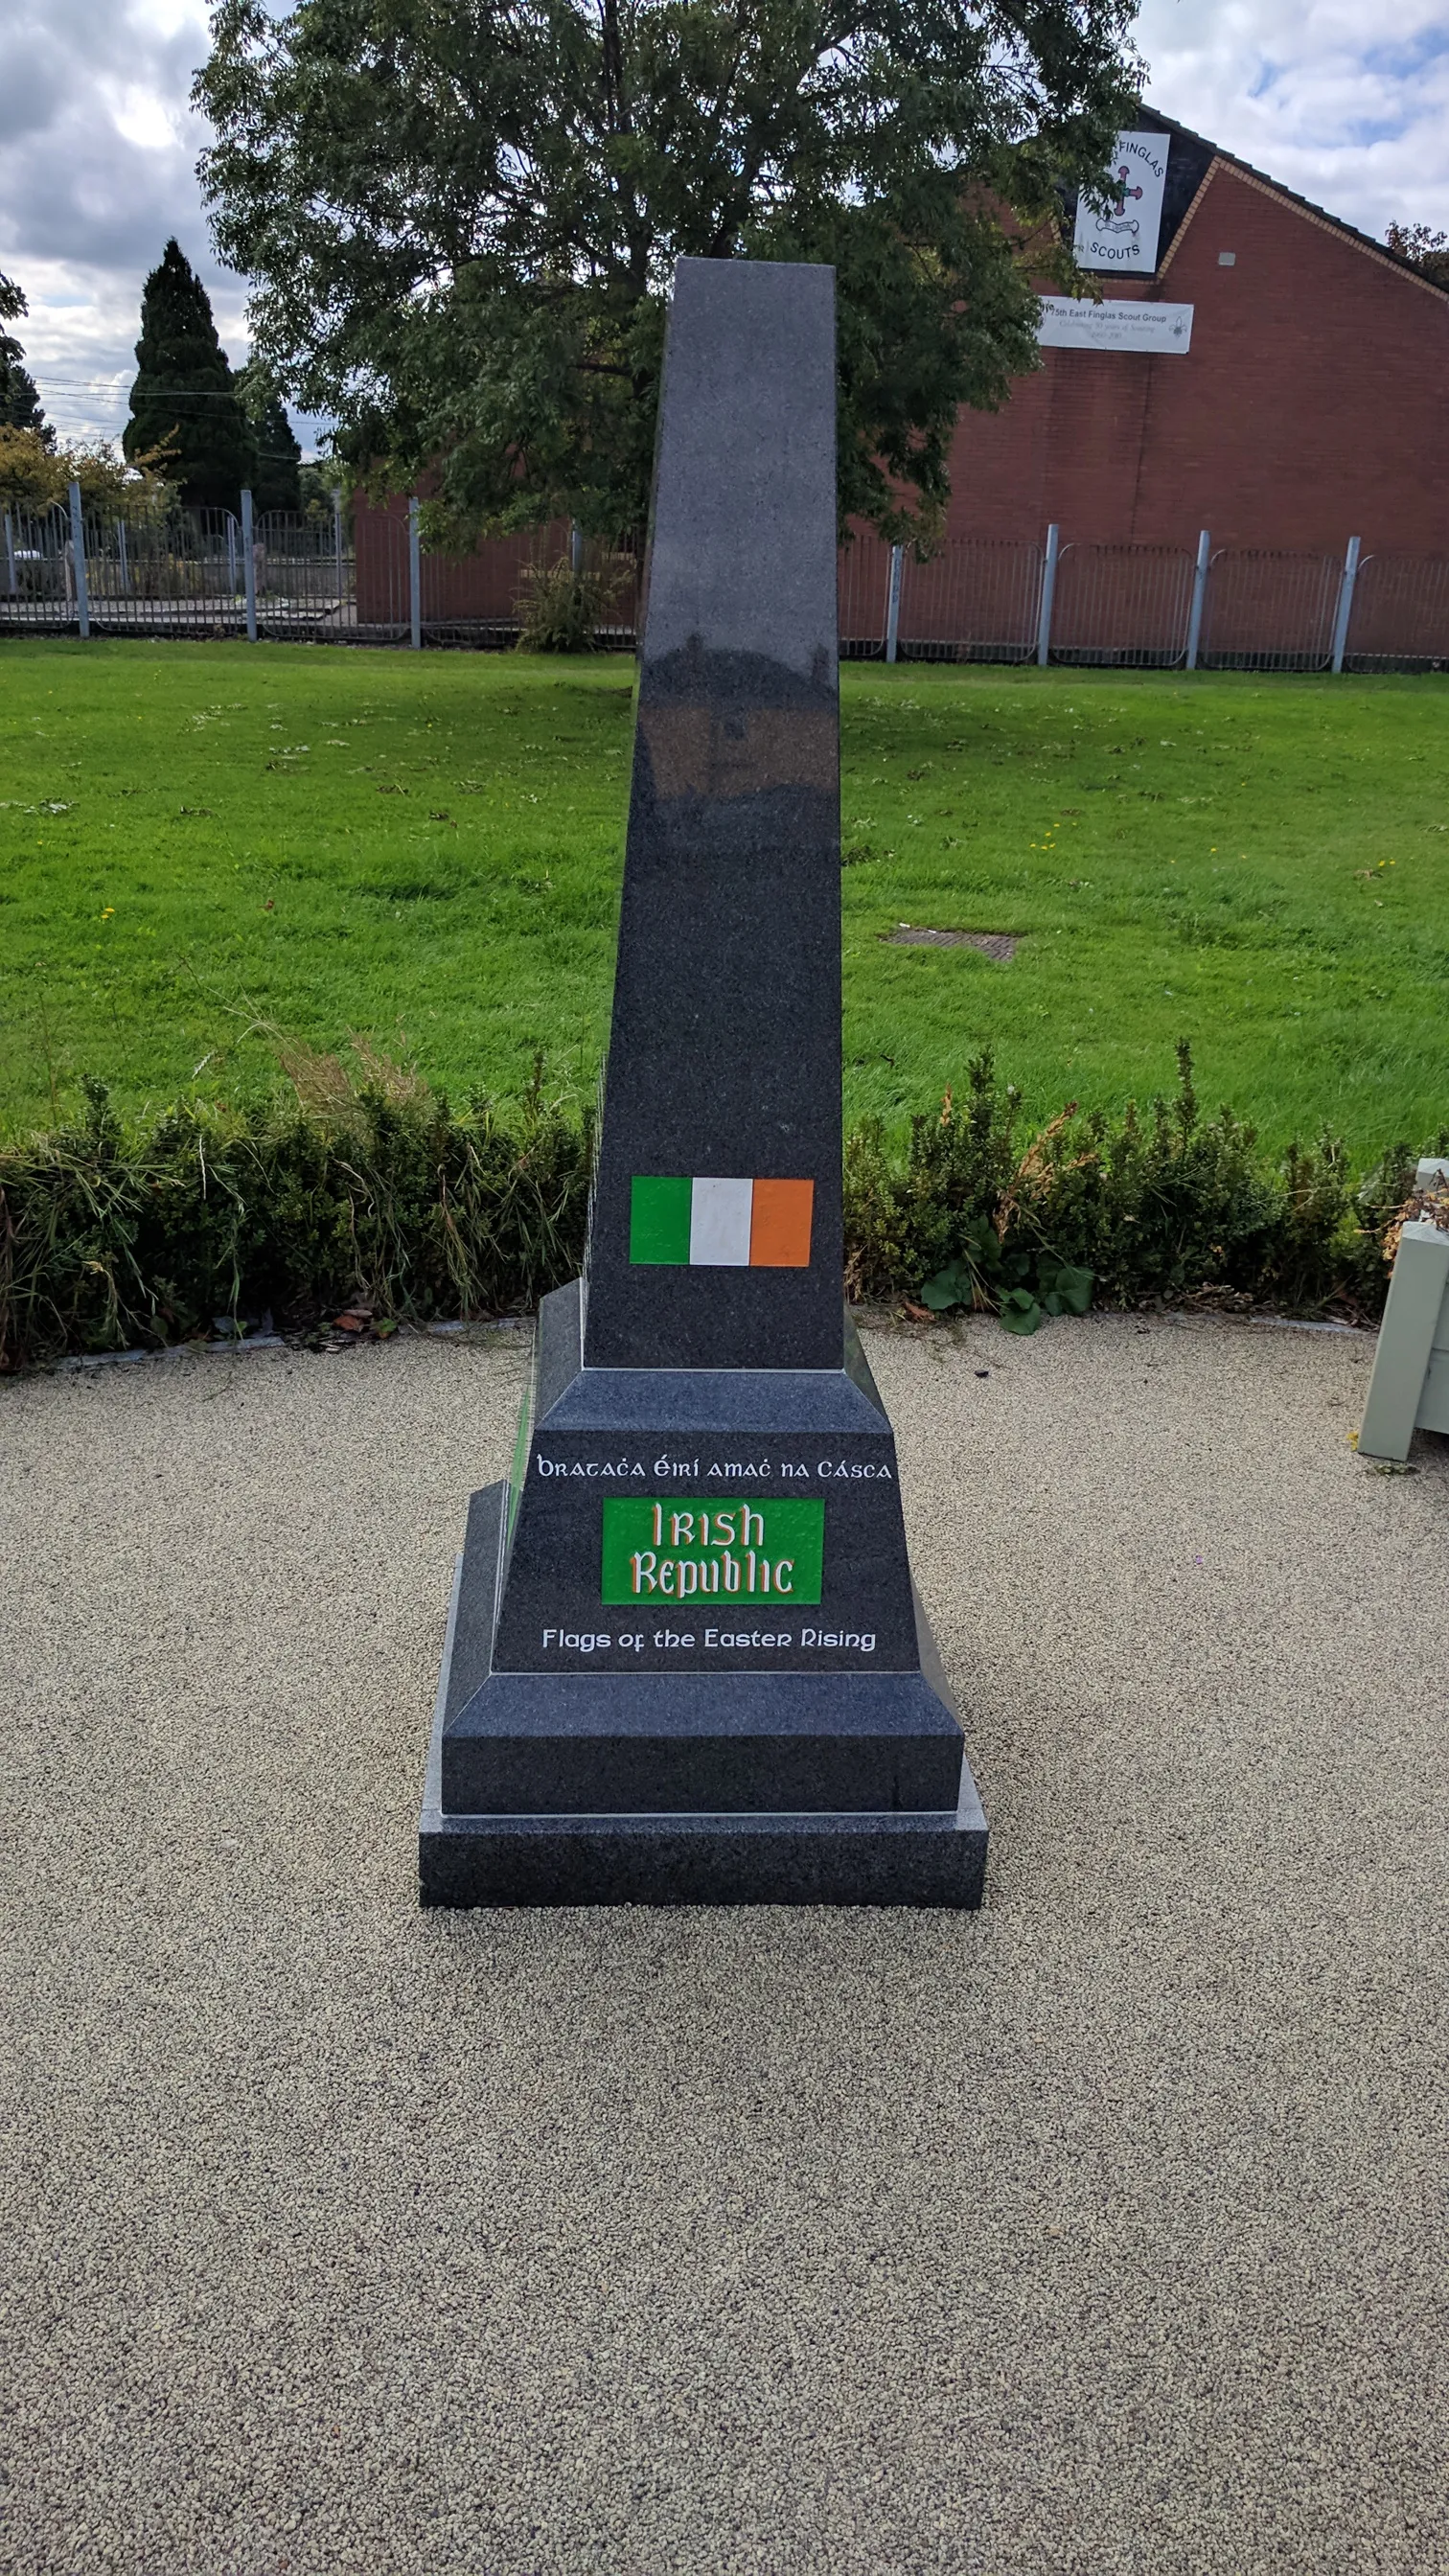 Photo showing: A monument in Finglas, Dublin depicting the various flags used in the 1916 Easter Rising.